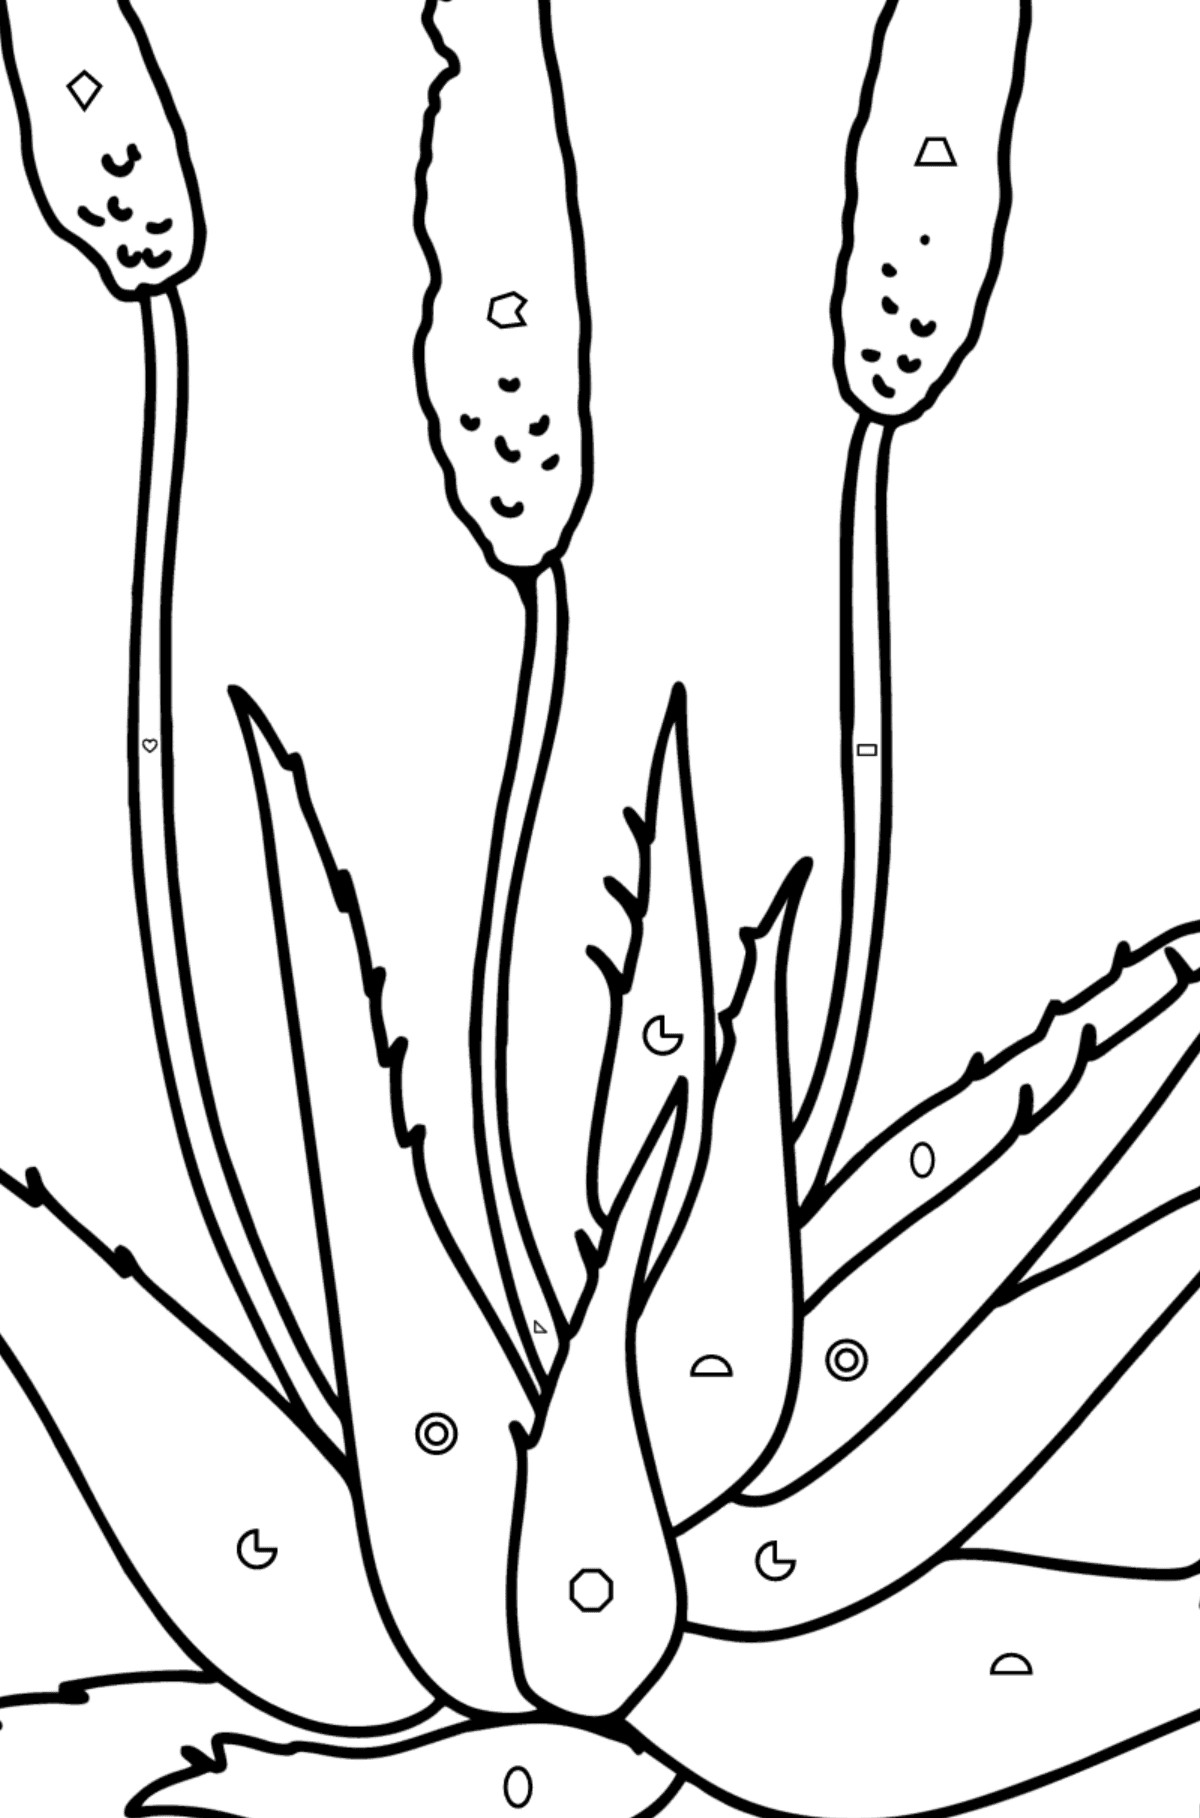 Aloe coloring page - Coloring by Geometric Shapes for Kids